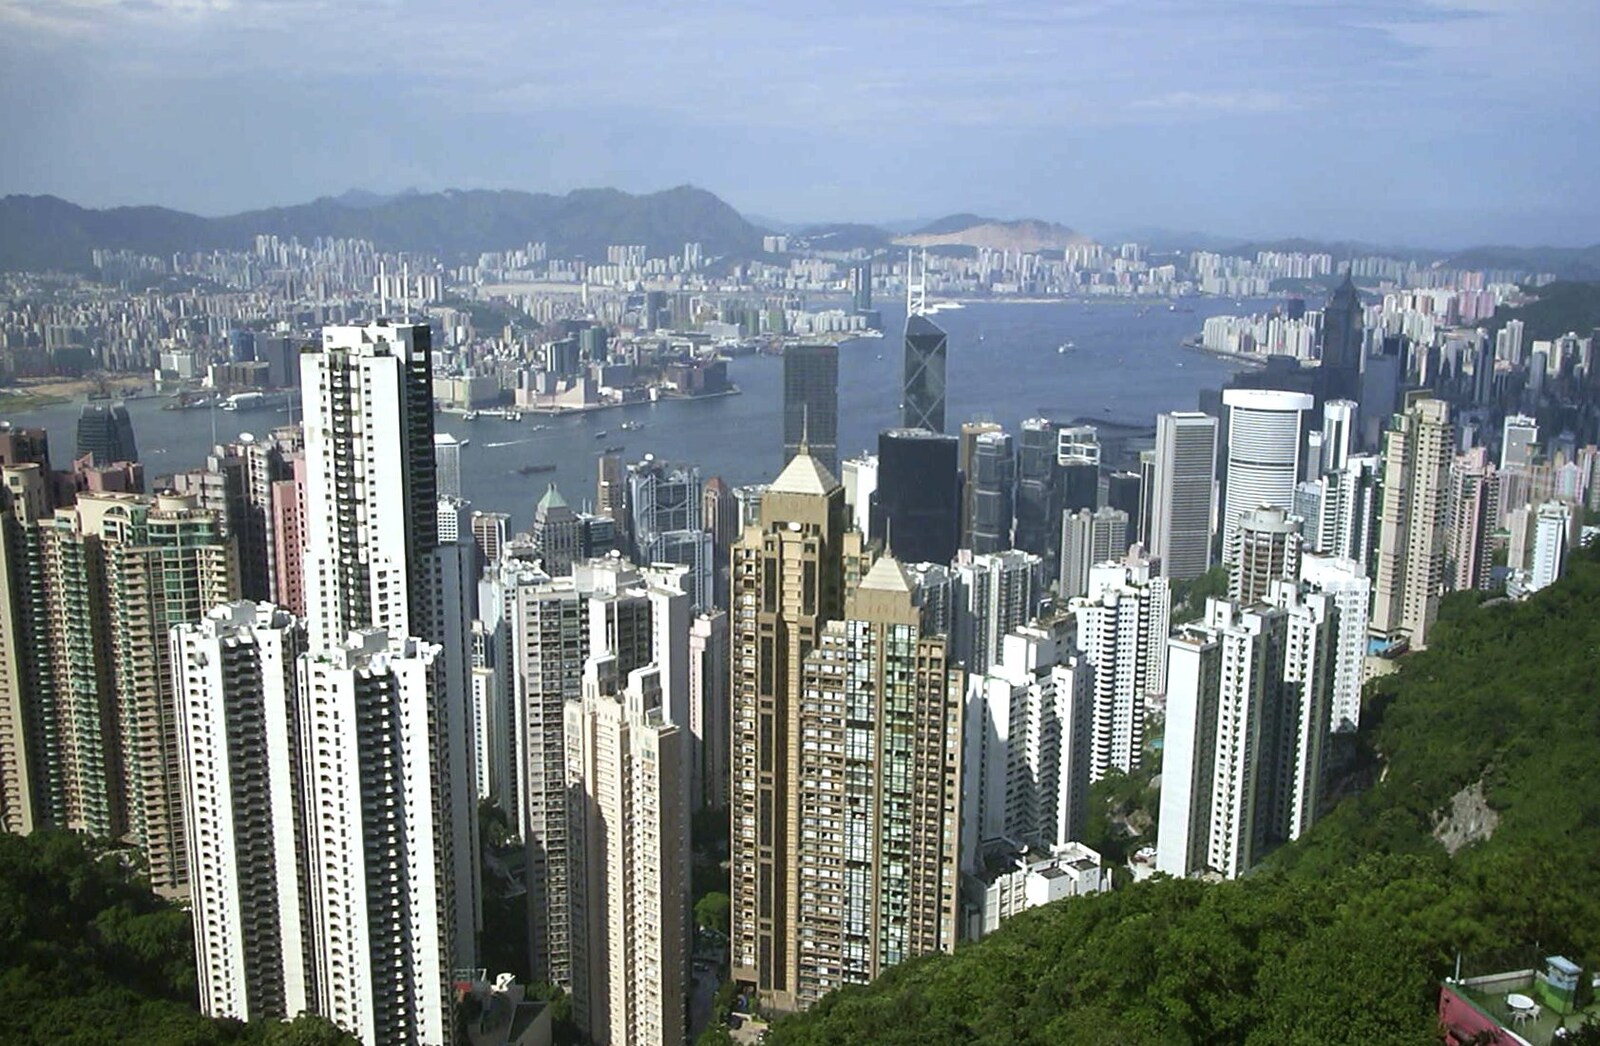 A Trip to Hong Kong, China - 11th August 2001: The classic view of Hong Kong from the top of Victoria Peak